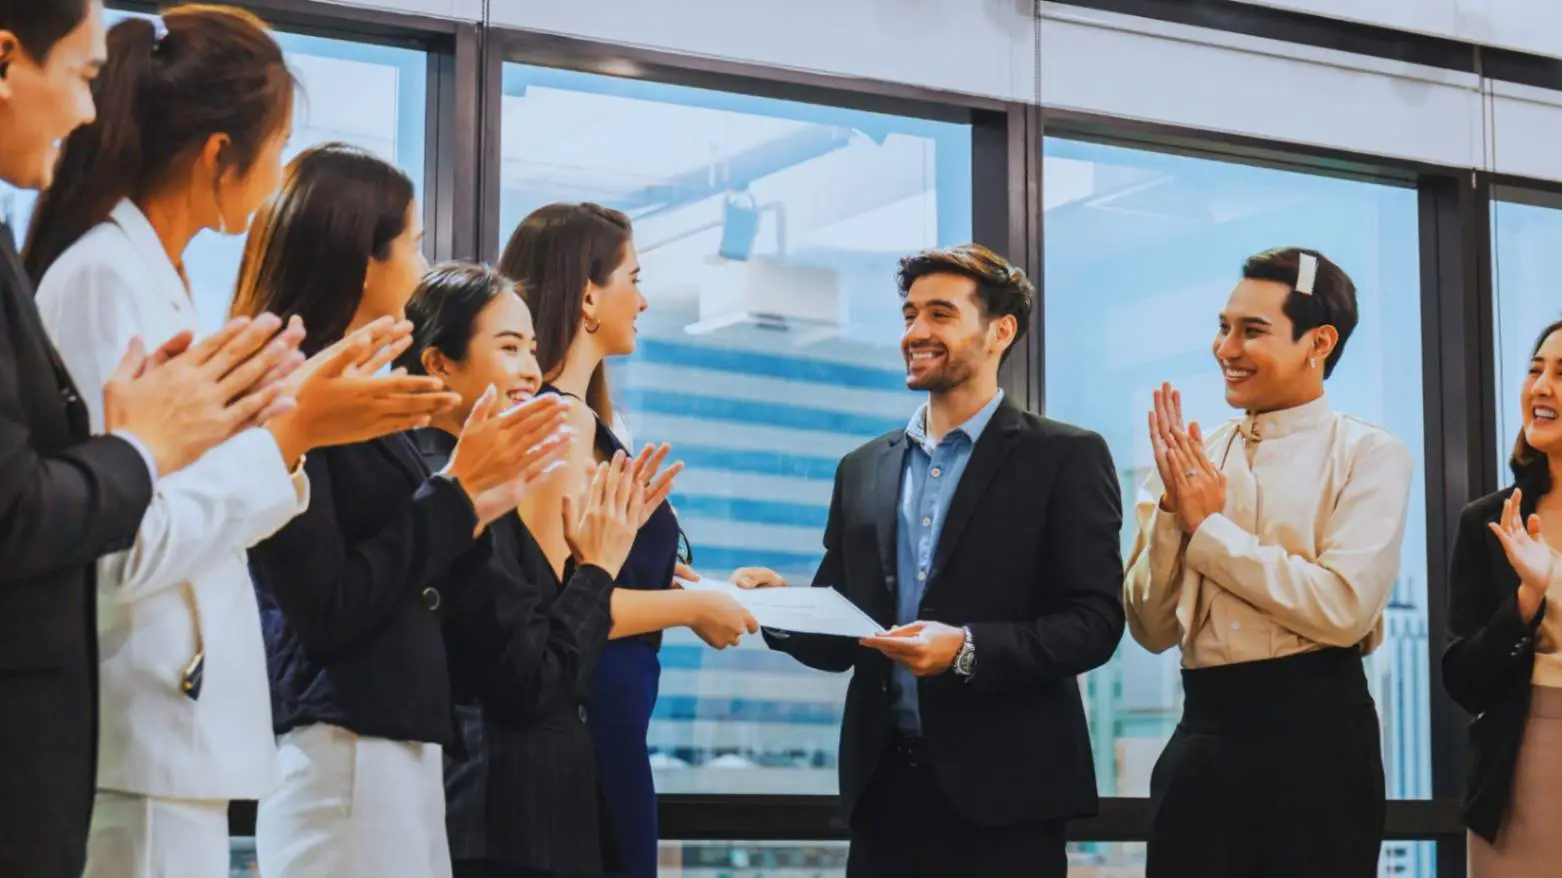 "Group of Asian and Hispanic colleagues applauding a young Caucasian man receiving an award in a modern office, celebrating teamwork and achievement."